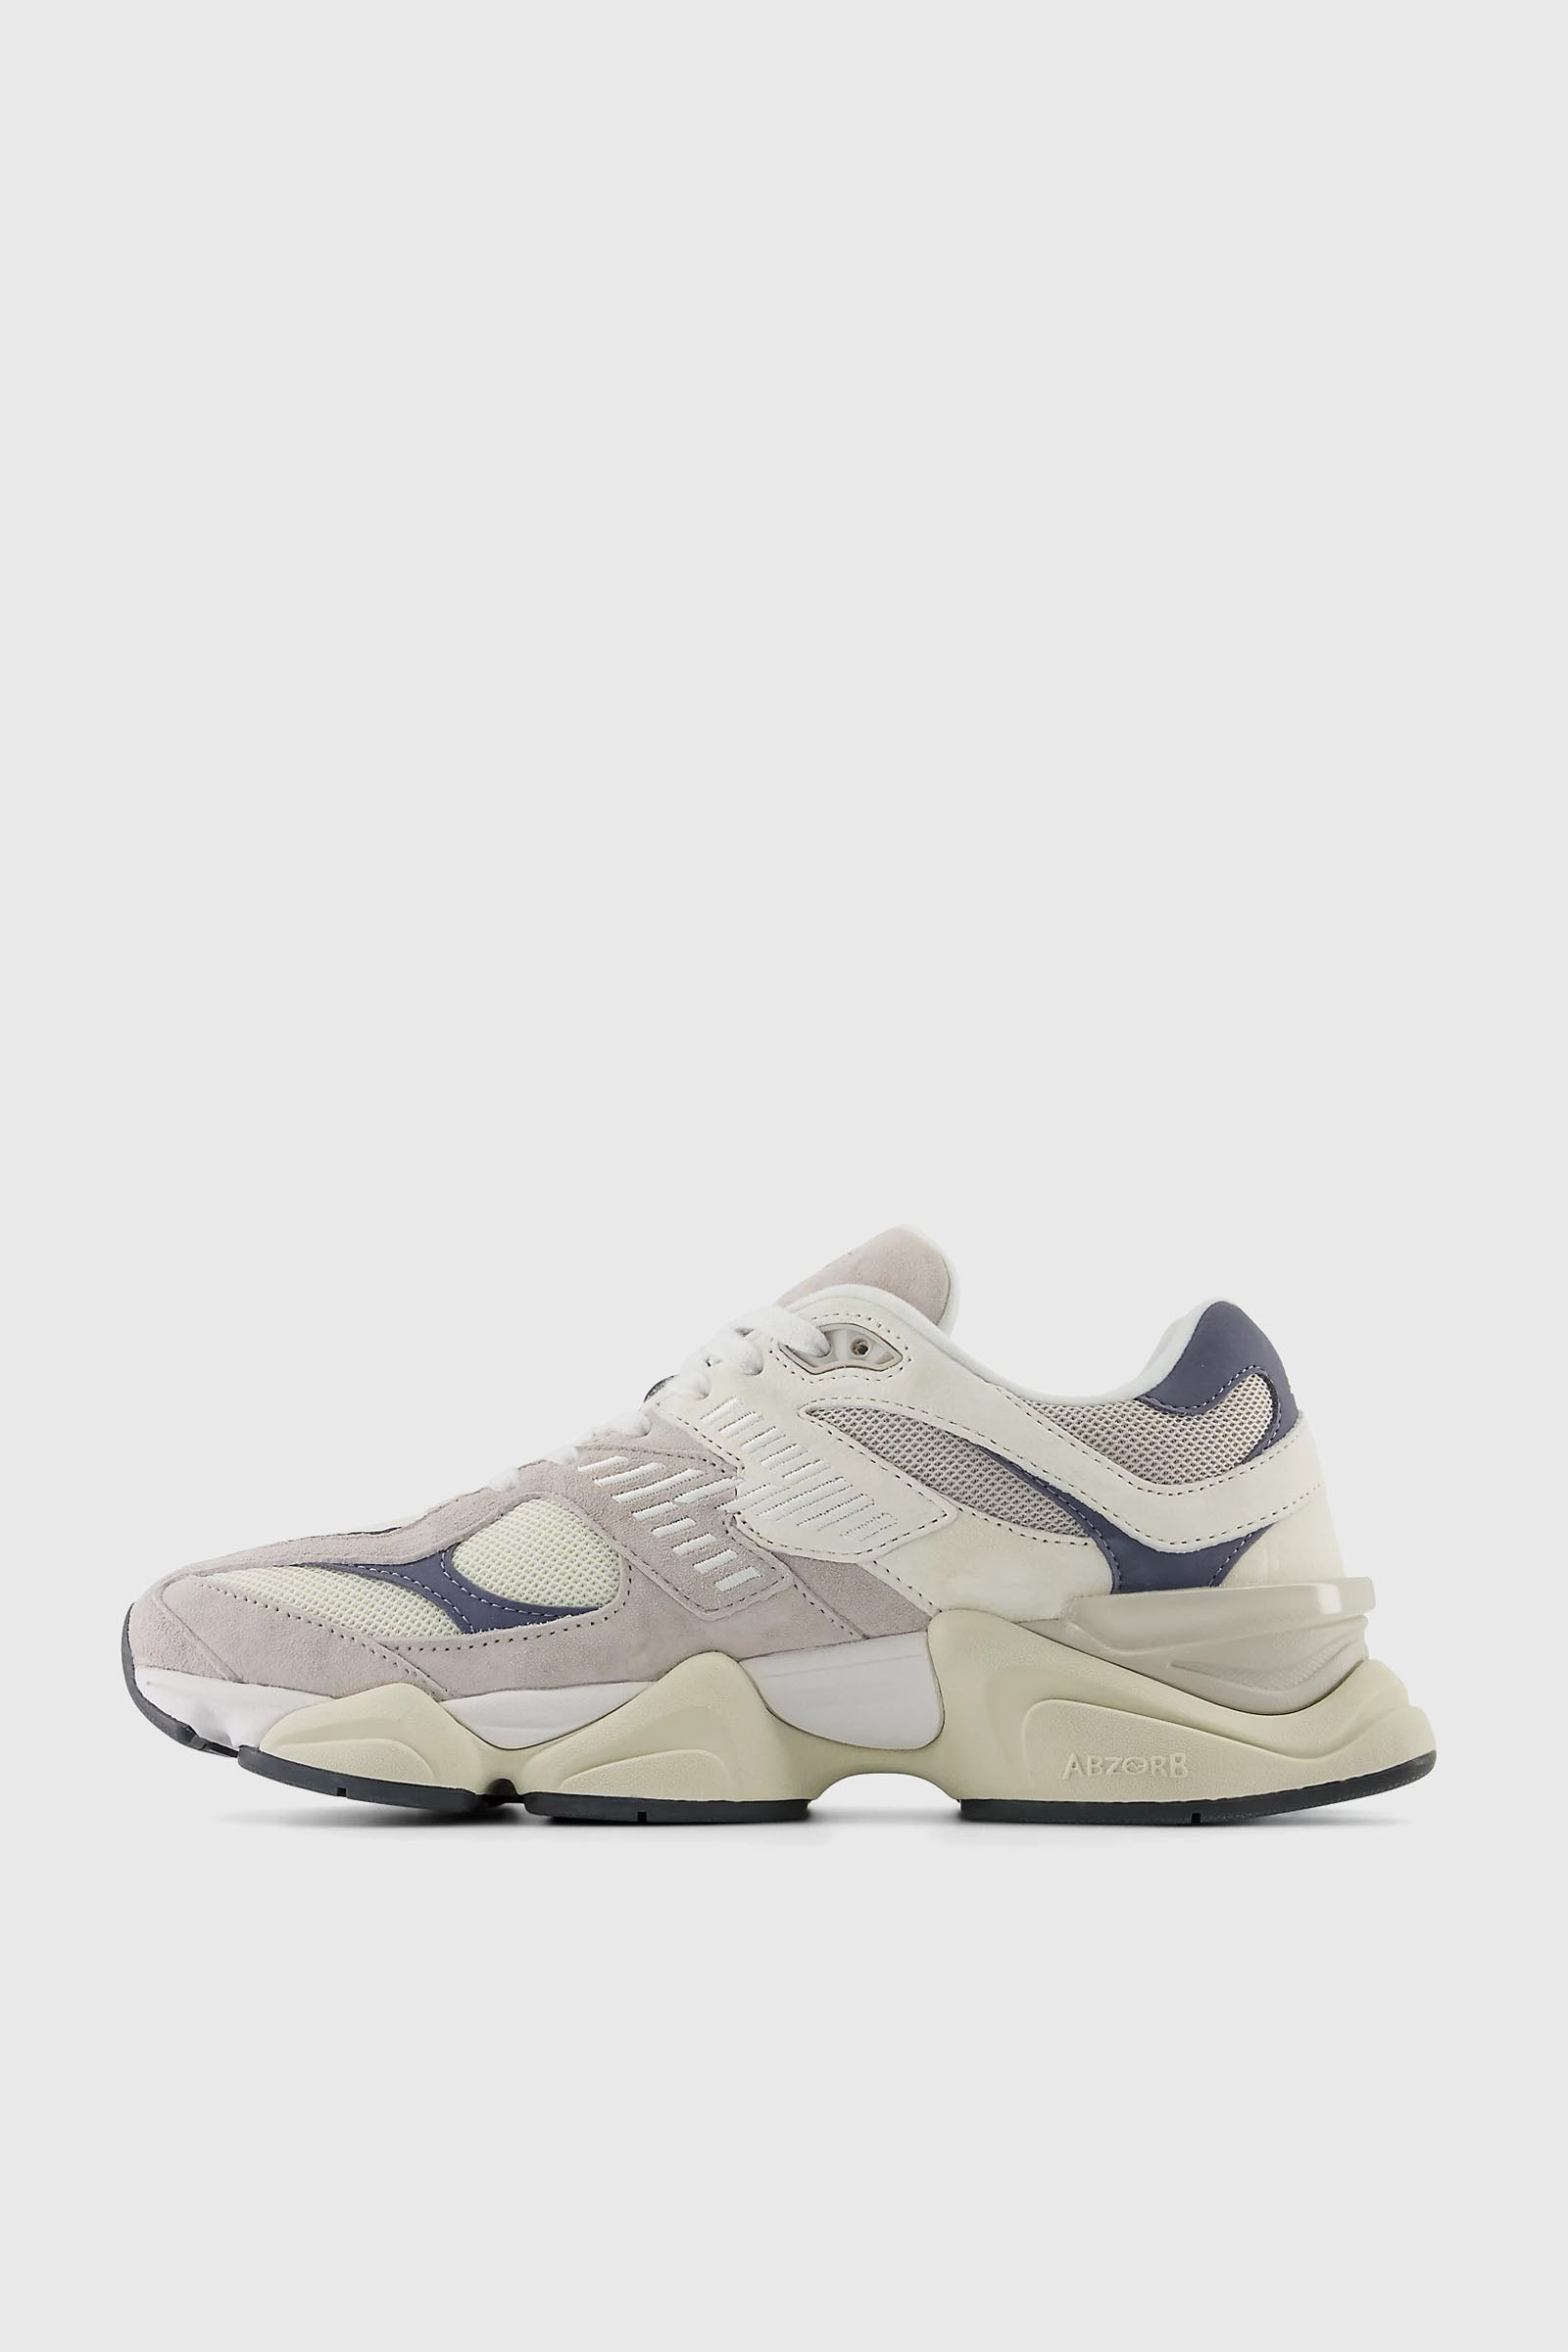 Title: New Balance 9060 Synthetic Cream Sneakers - 5